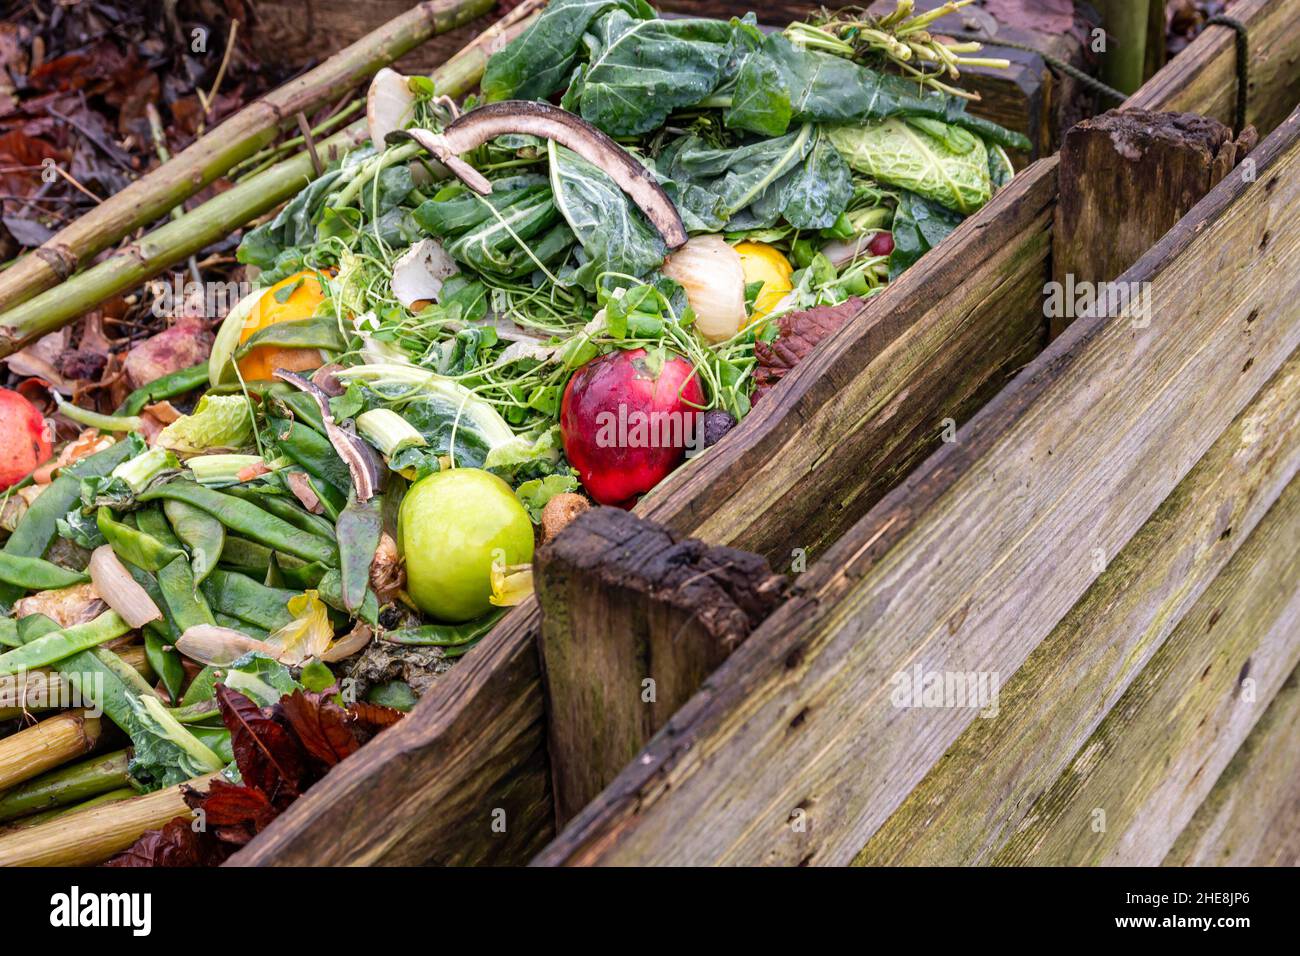 Pile of fruit and vegetable scraps in homemade wooden compost bin in the garden, selective focus Stock Photo